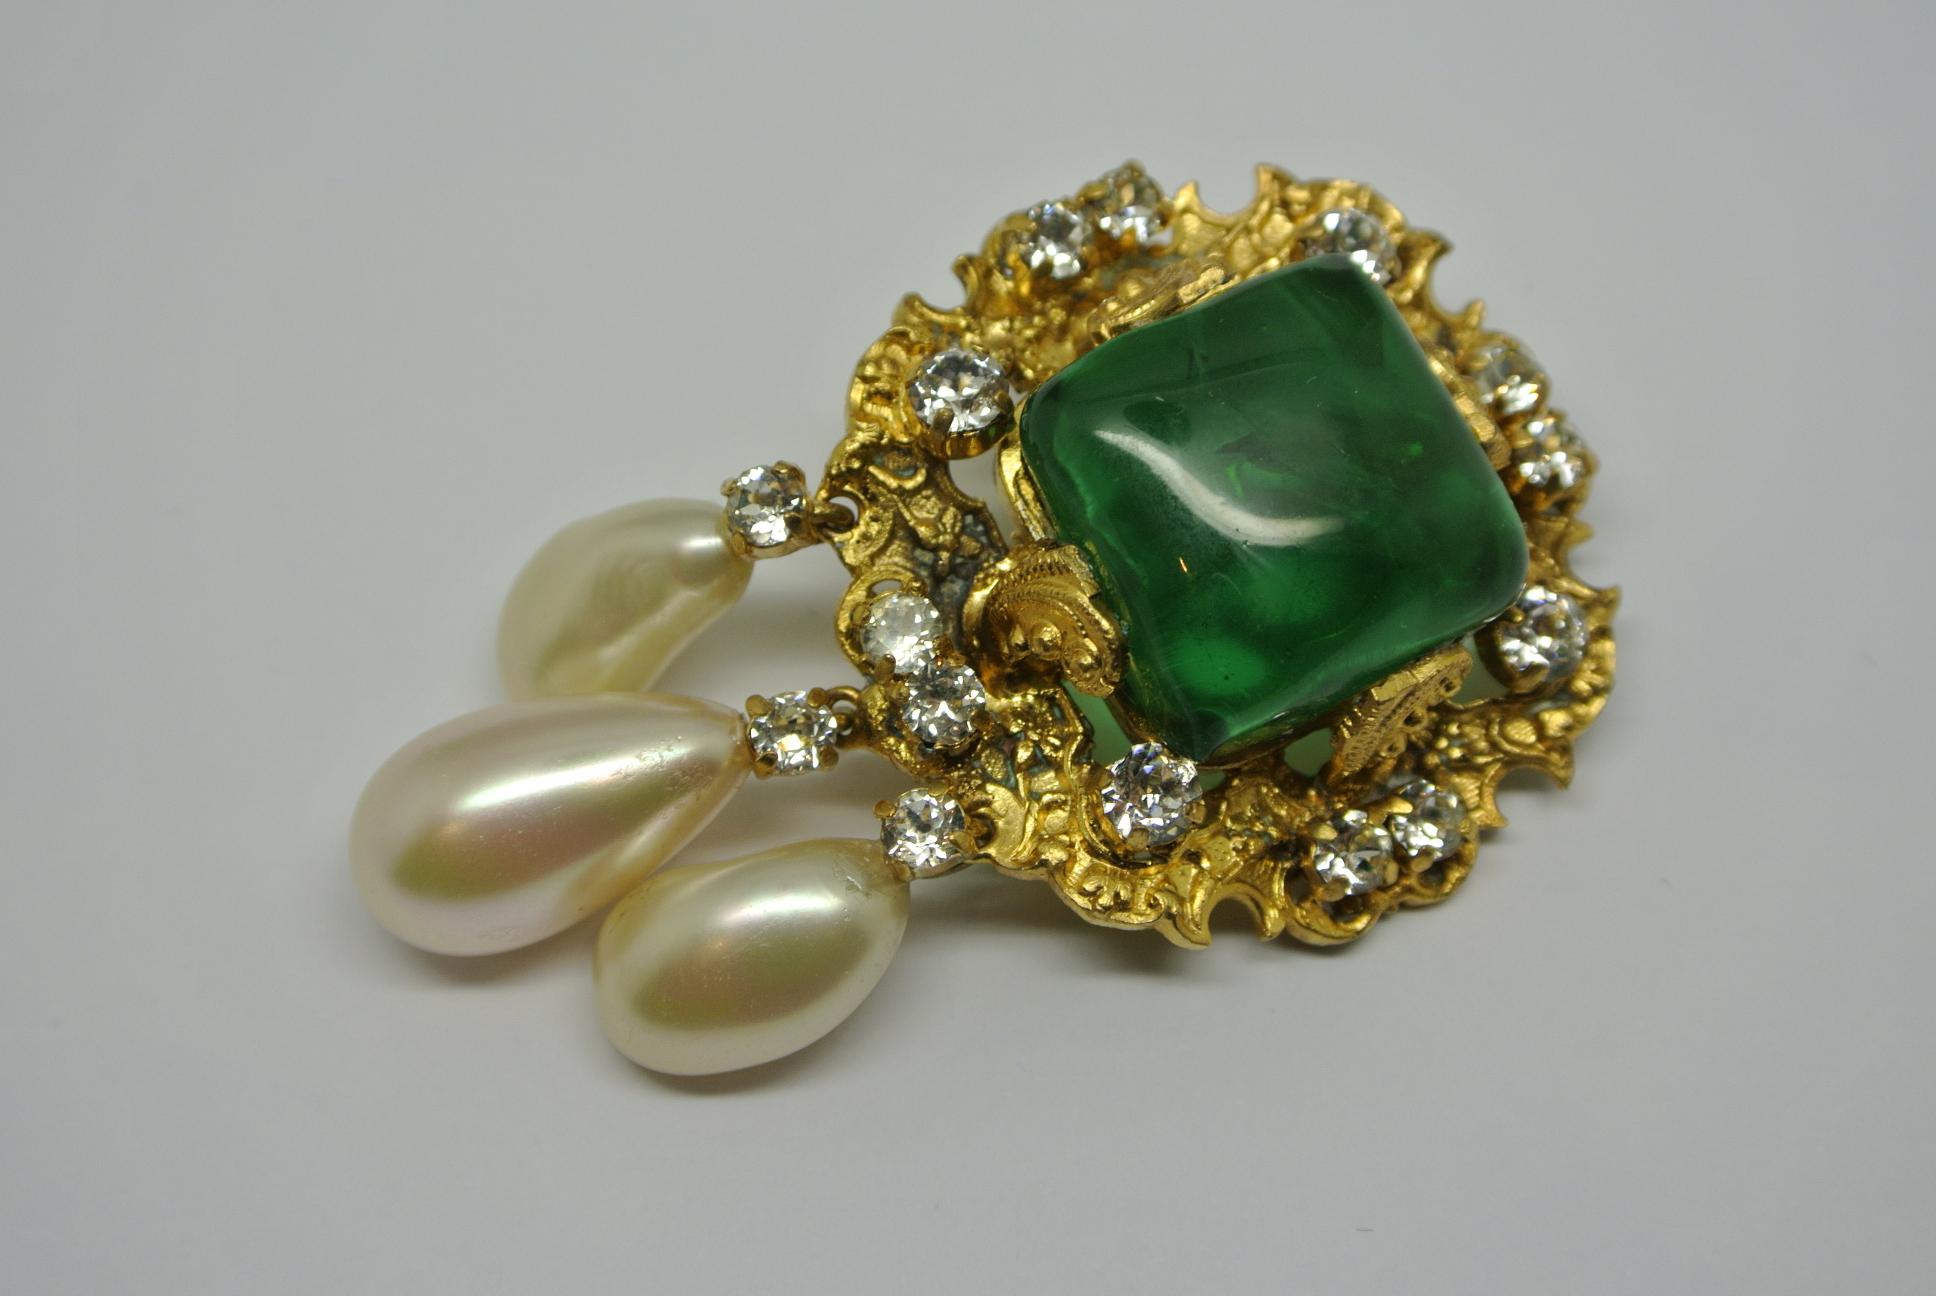 Artist Vintage Chanel Byzantine Green Poured Glass Gripoix Filigree Pearl Drop Brooch For Sale